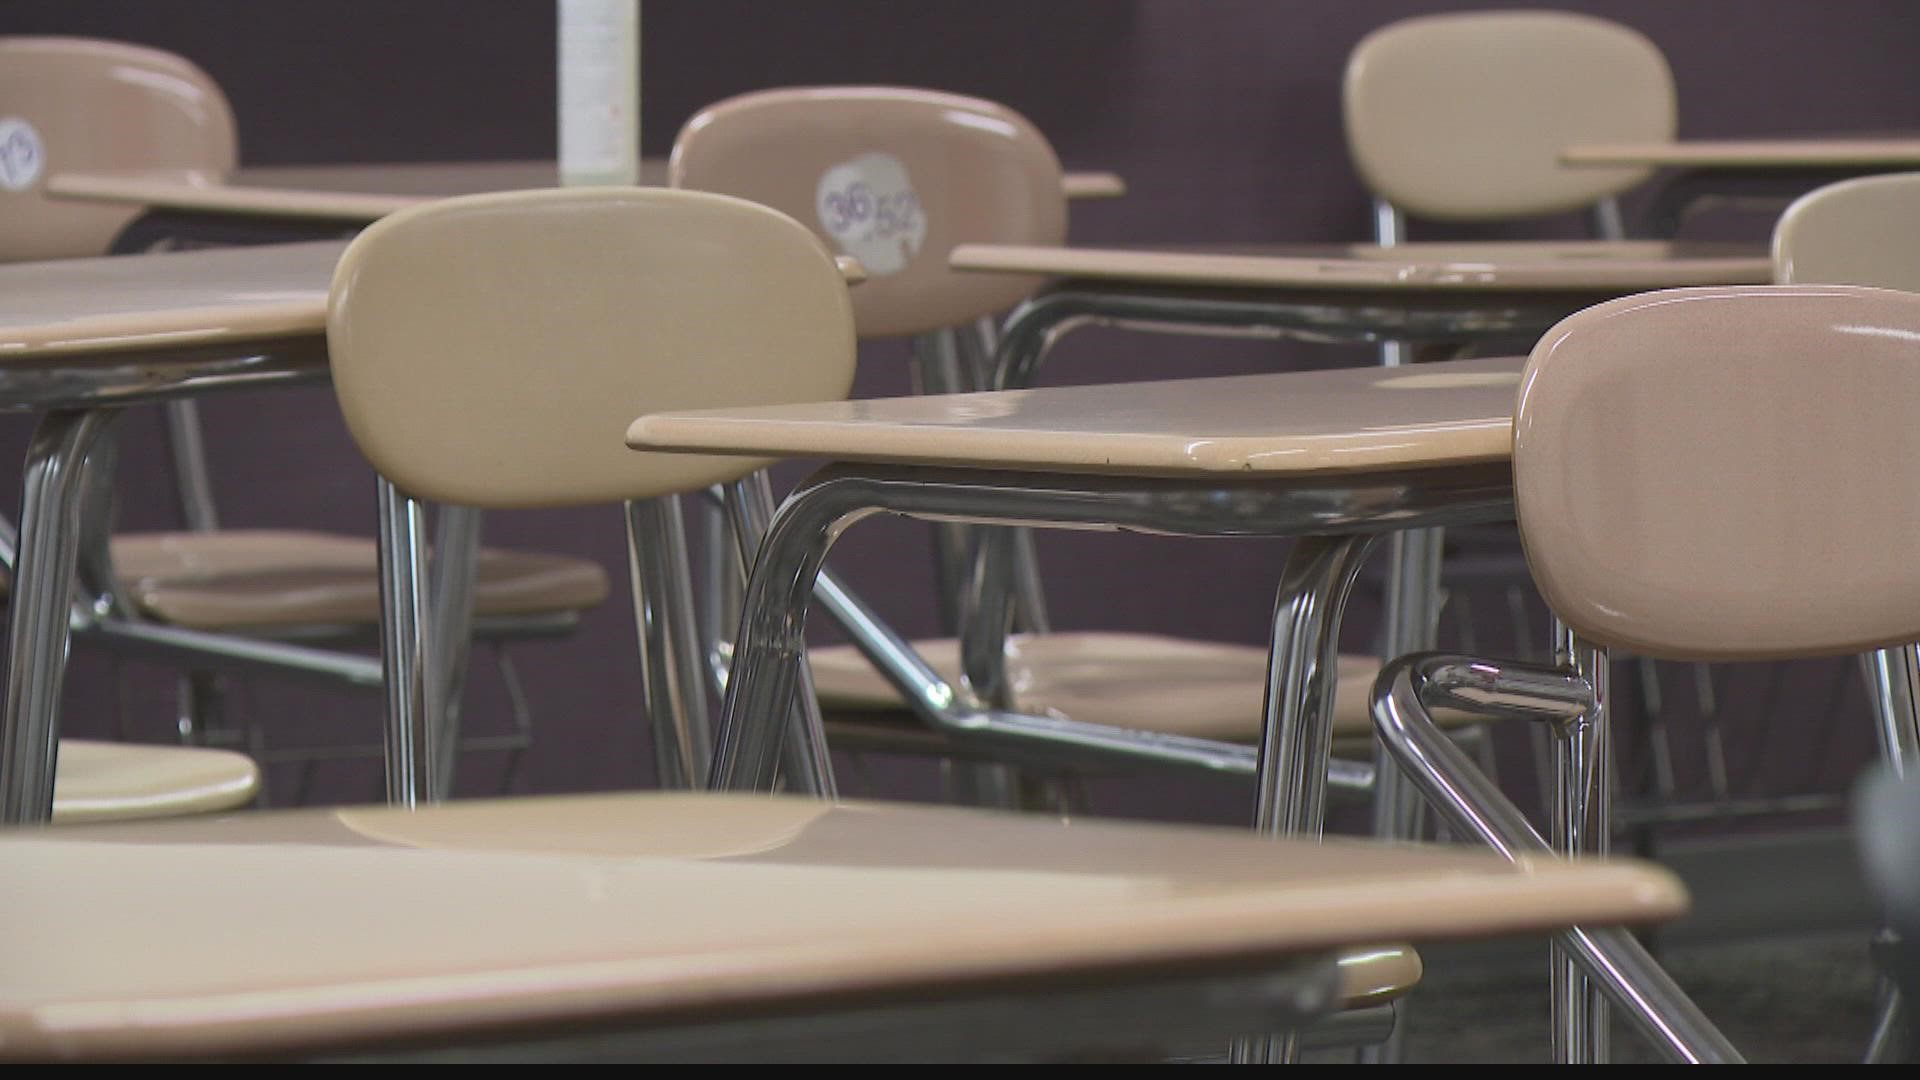 School officials said teachers are feeling the strain of shortages.